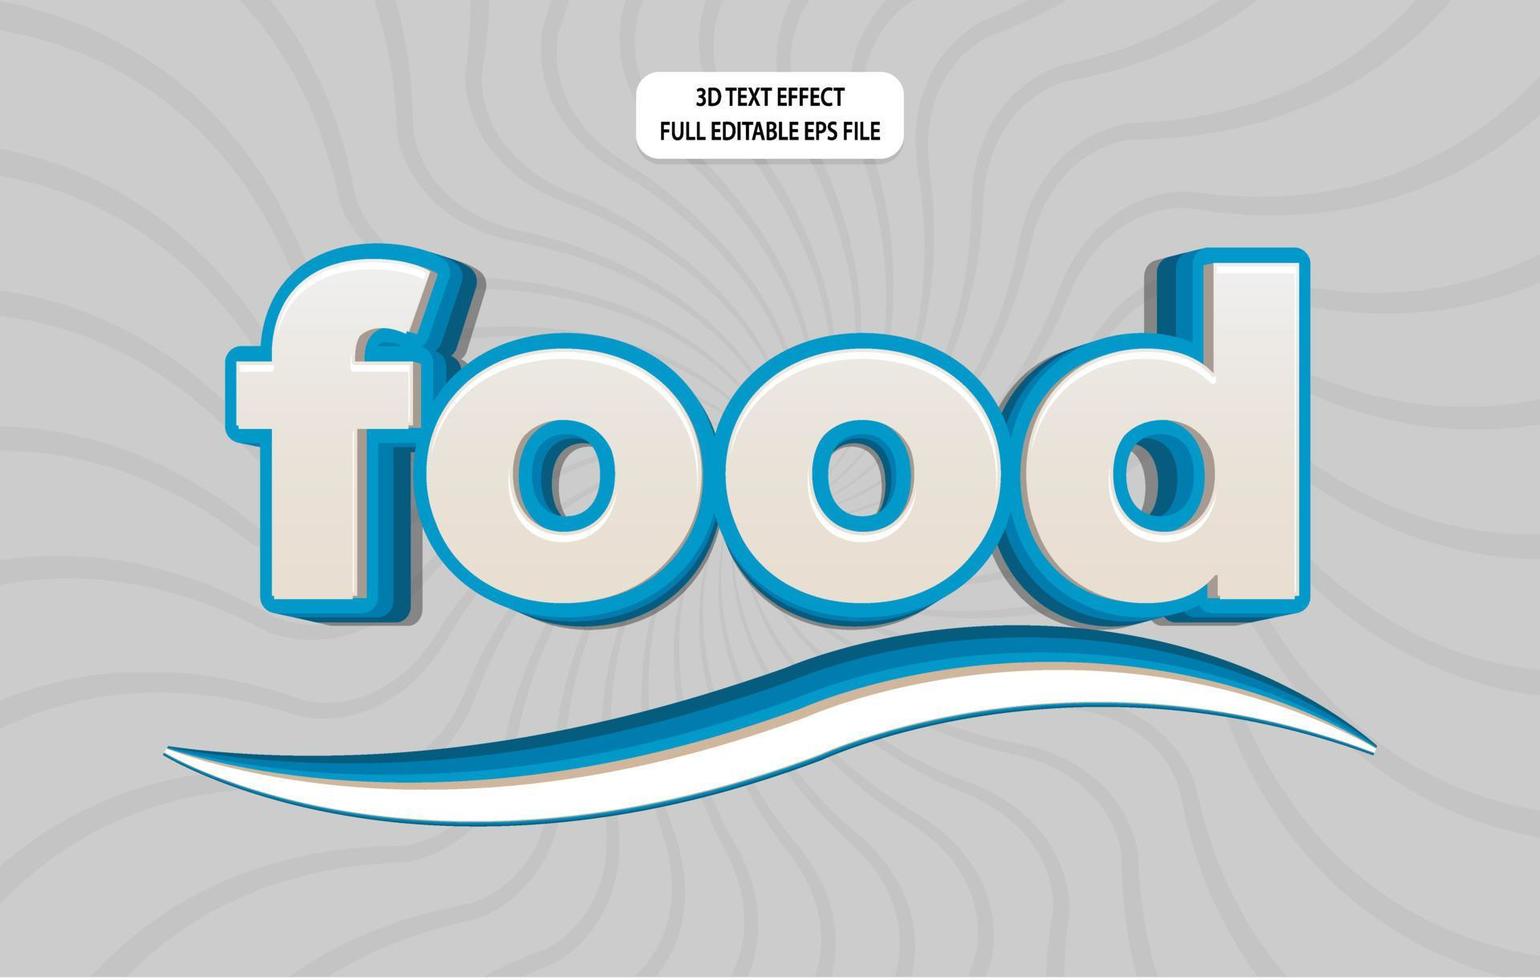 food 3D editable text effect template, text effect style vector